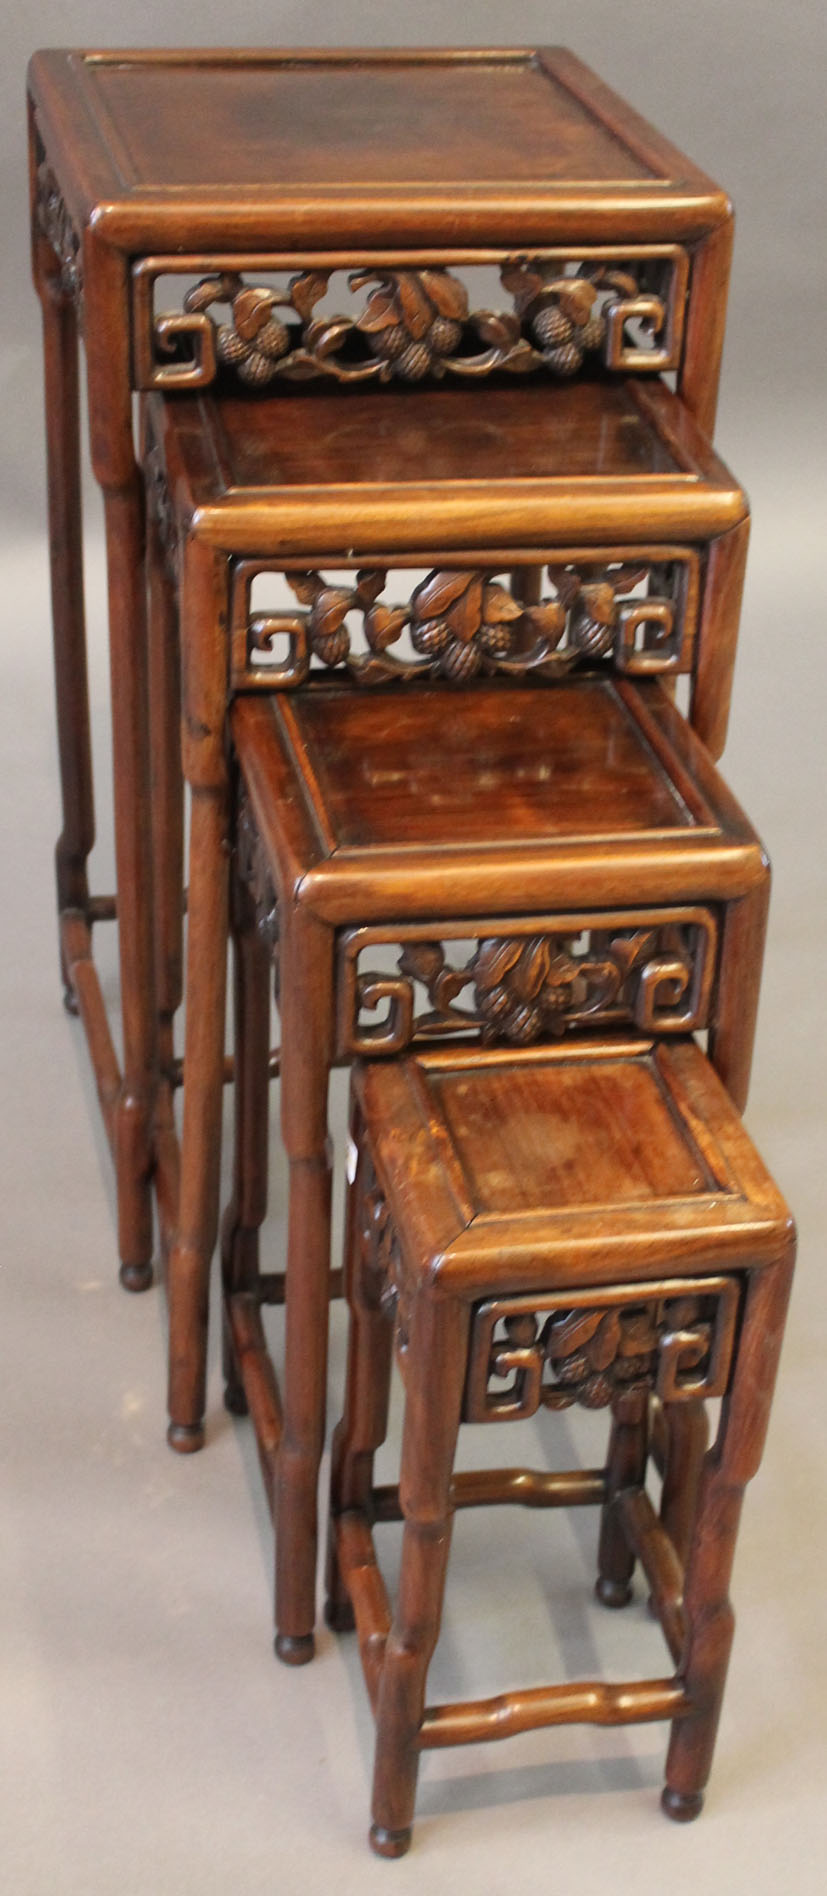 A fine quality Quartetto nest of Chinese huanghuali style tables, late Qing dynasty (1644-1912), the